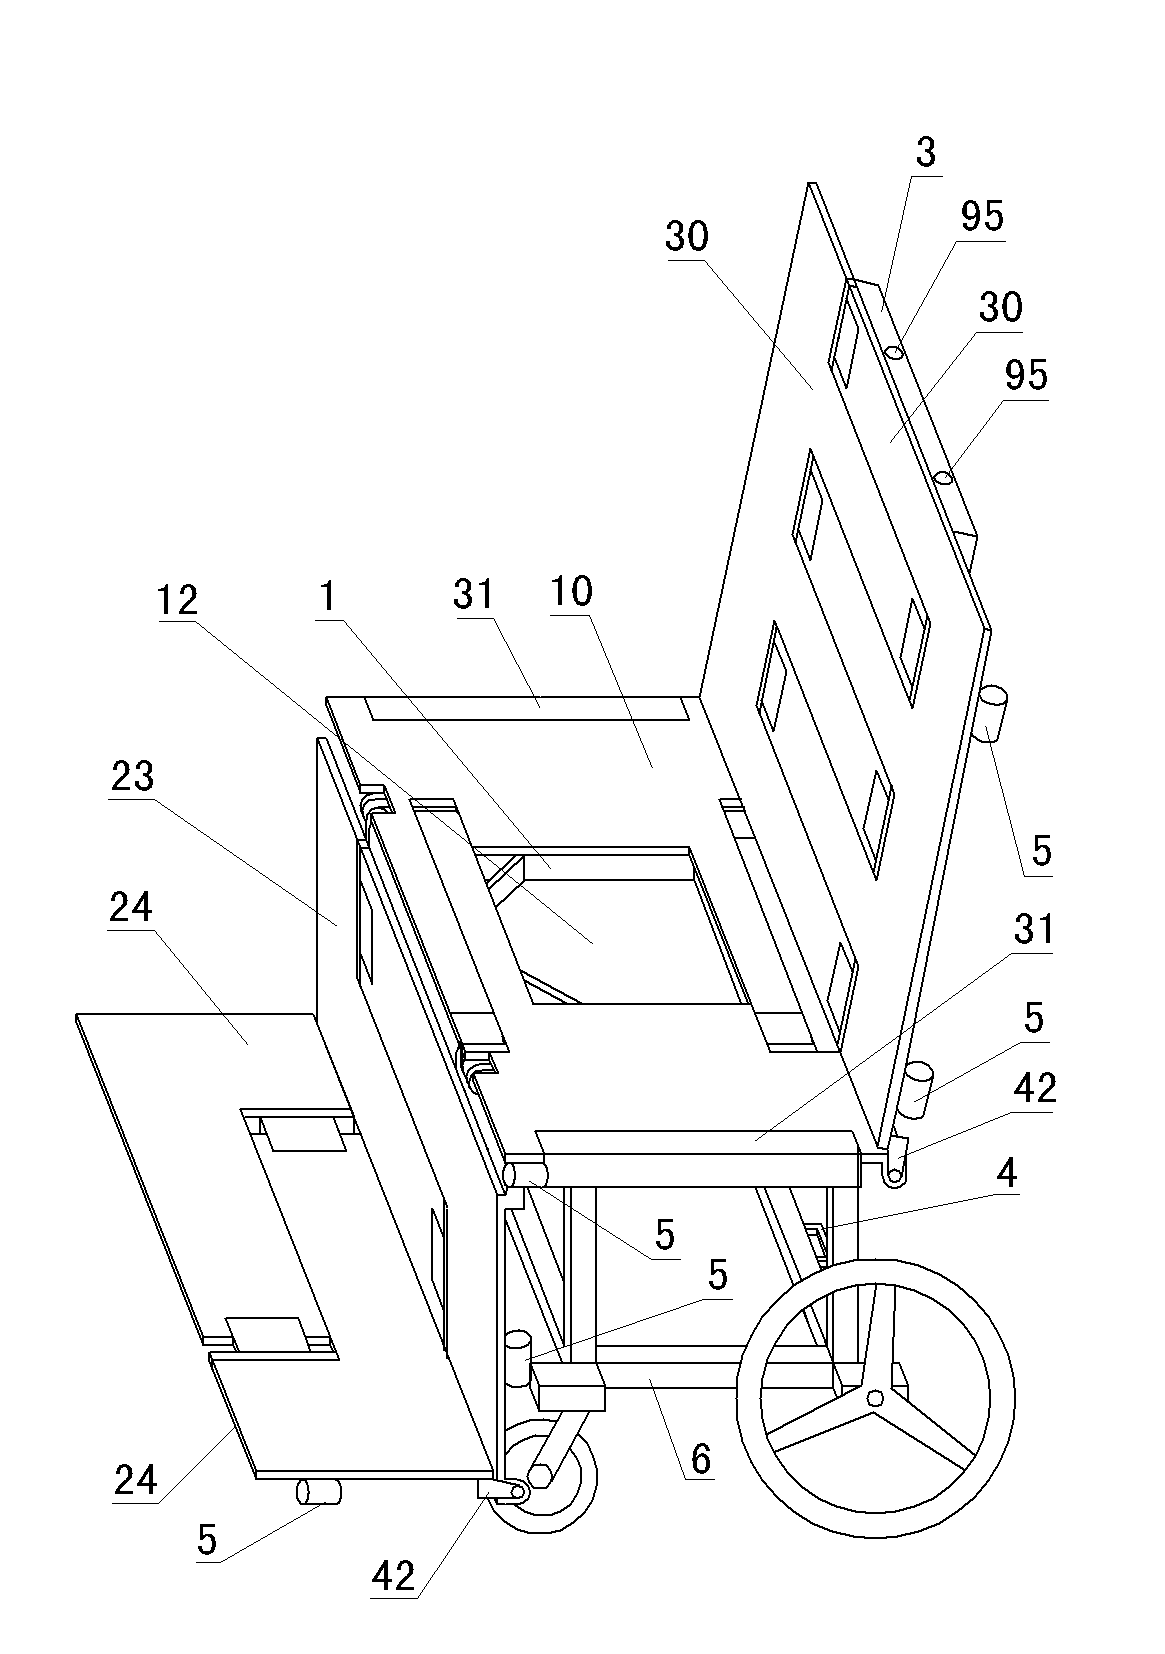 Turning-over bed or multi-functional nursing wheelchair-bed composed of lying wheelchair and bed plates